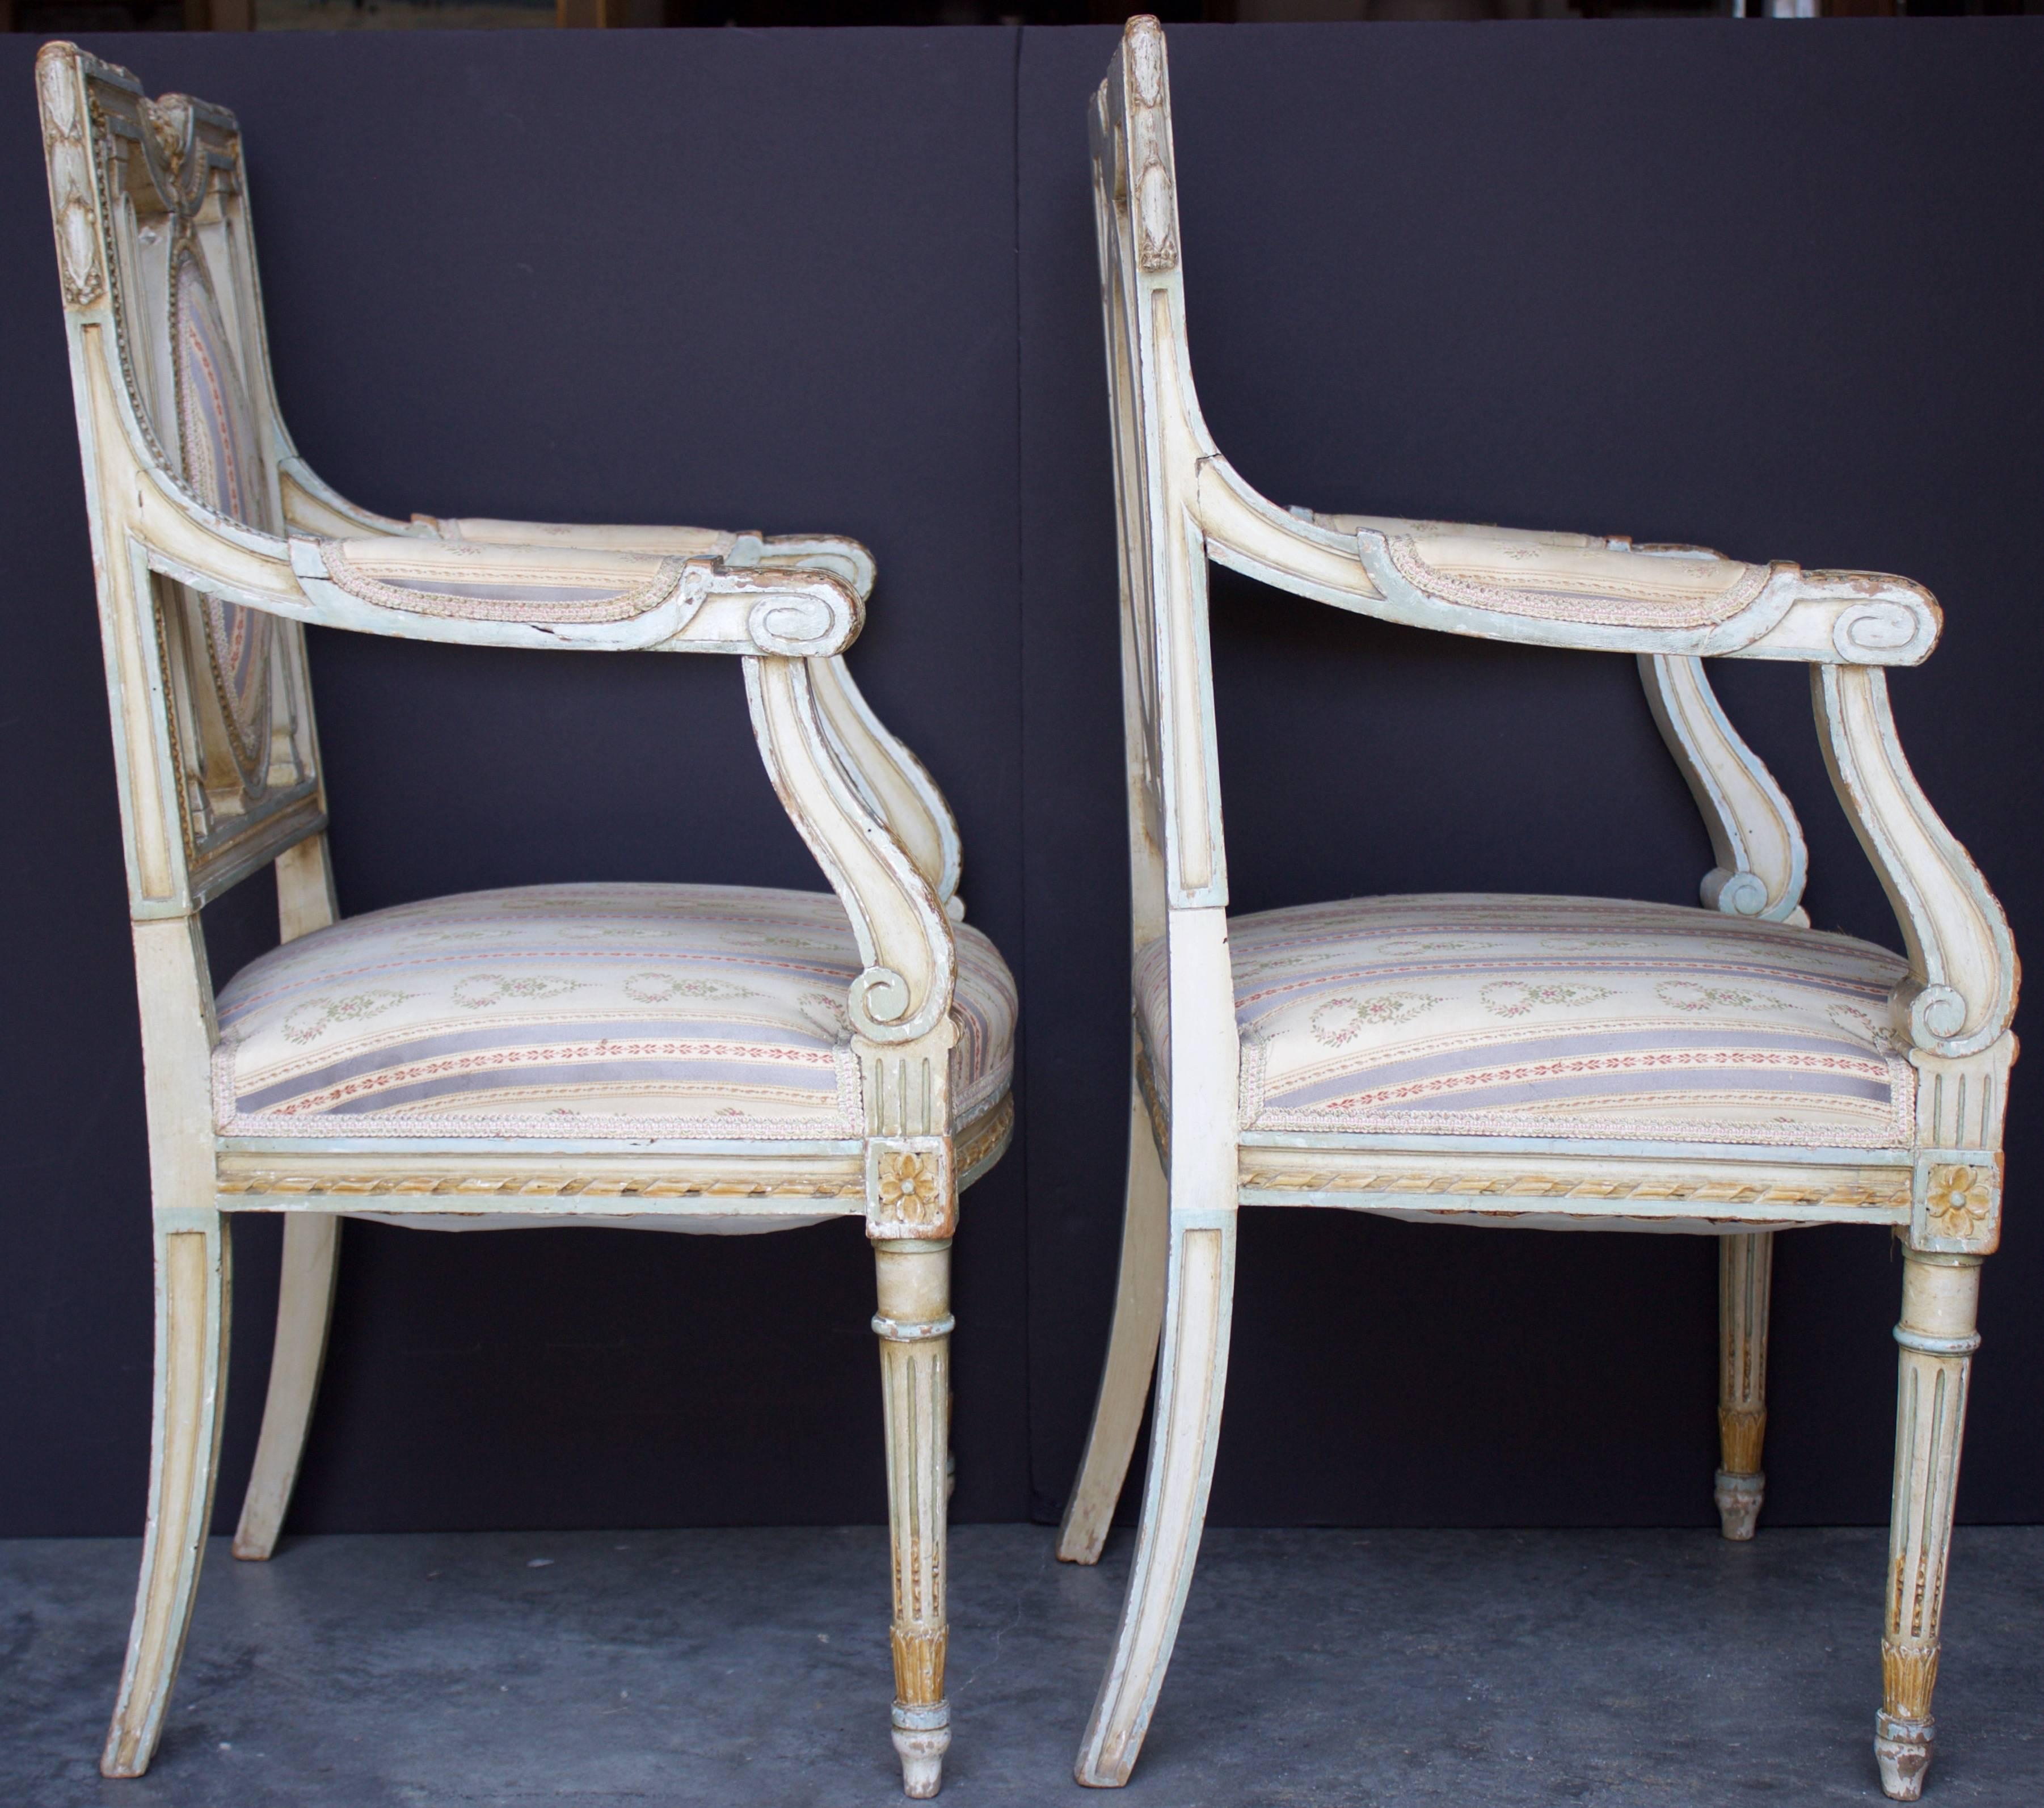 A Delightful pair of Period Louis XVI Armchairs with an incredibly elegant silhouette and variegated ornamentation on their backrest, posts, armrests and legs.
Square backed and decorated by handmade beads and Olive Laurel all around, concave top